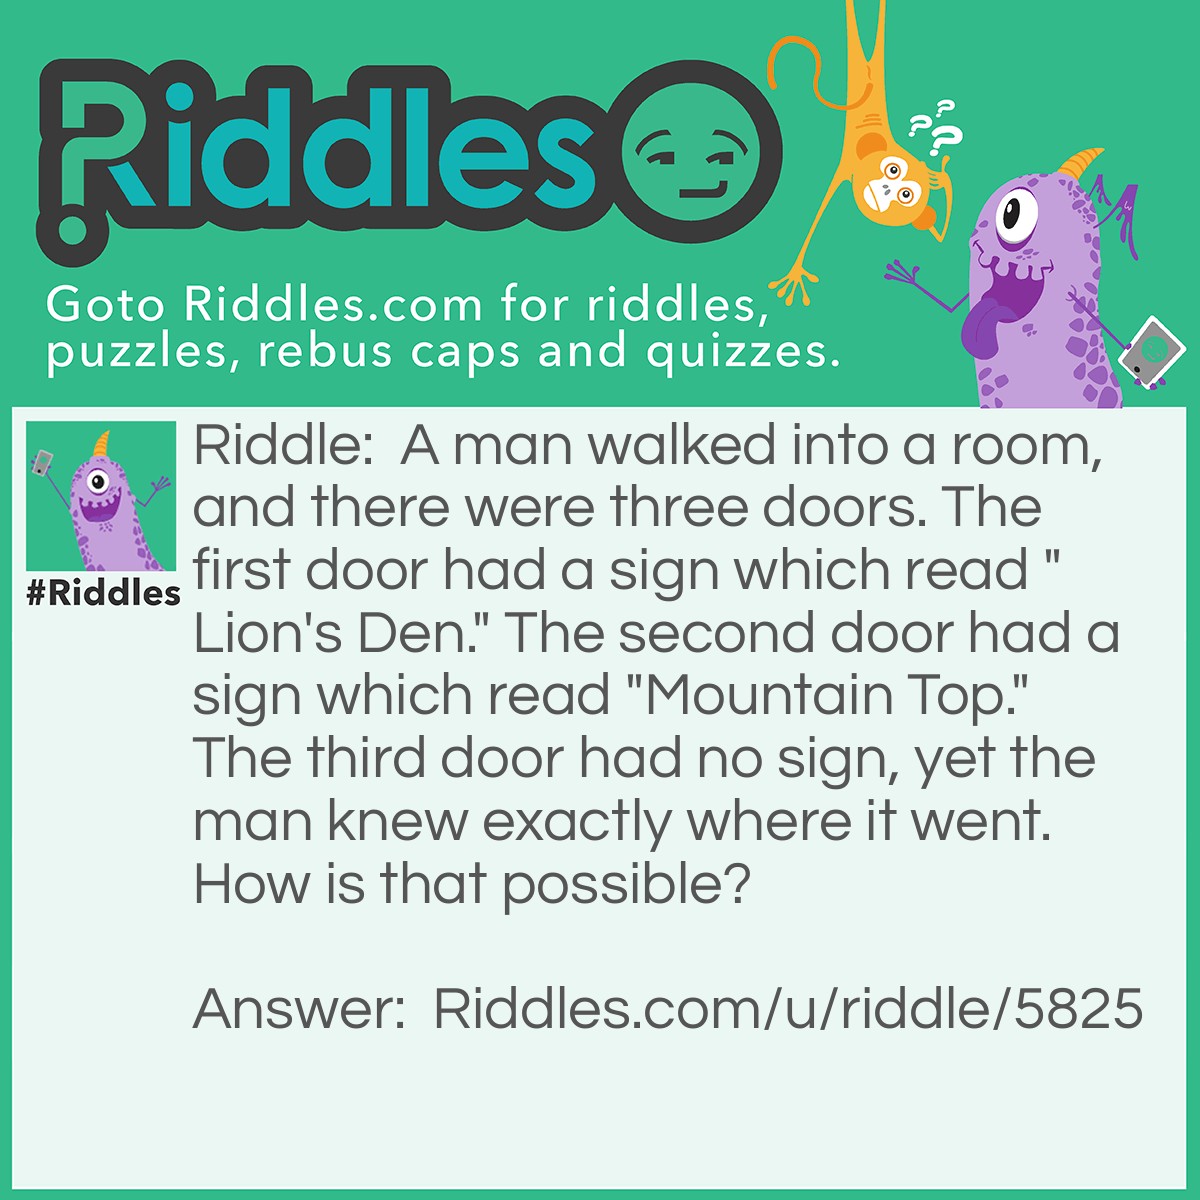 Riddle: A man walked into a room, and there were three doors. The first door had a sign which read "Lion's Den." The second door had a sign which read "Mountain Top." The third door had no sign, yet the man knew exactly where it went. How is that possible? Answer: The third door is the door that the man entered through.